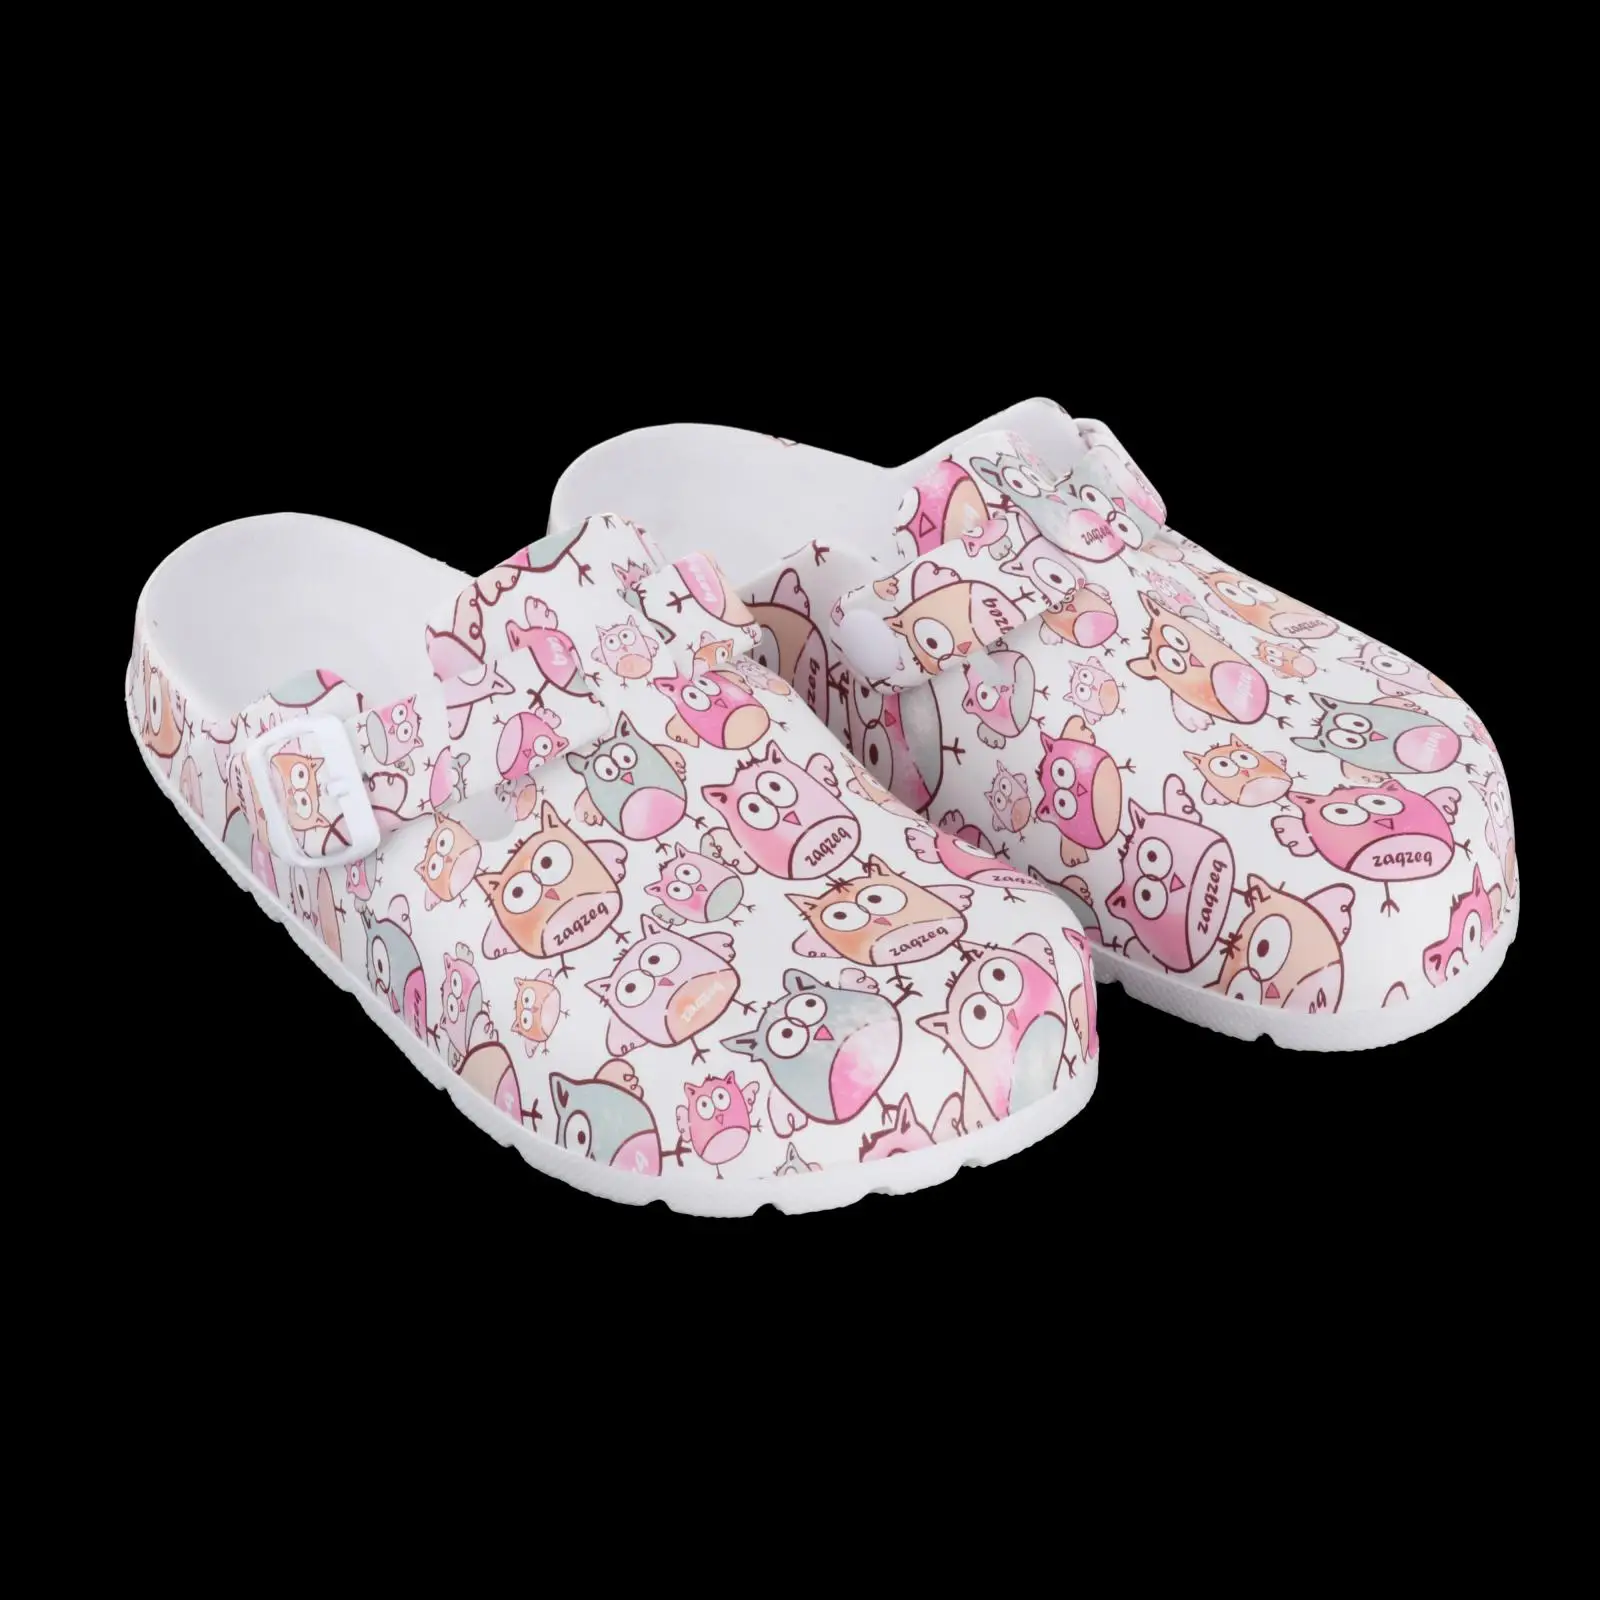 Slippers for Women Quick Drying, EVA Soft Slippers, Non-Slip Soft Shower Spa Bath Pool Gym House Sandals for Indoor & Outdoor